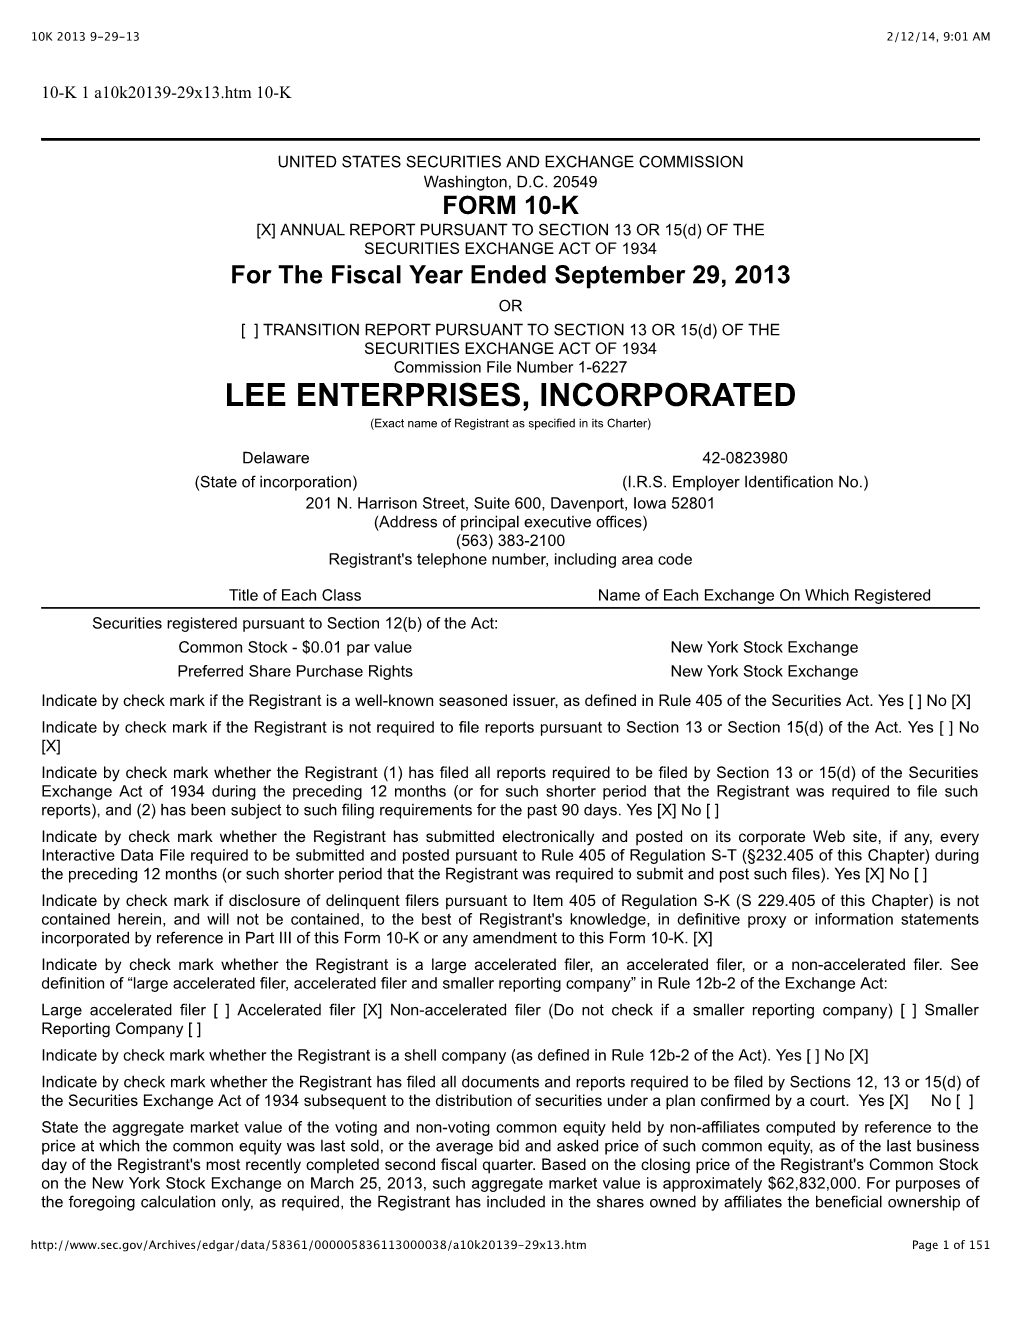 LEE ENTERPRISES, INCORPORATED (Exact Name of Registrant As Specified in Its Charter)